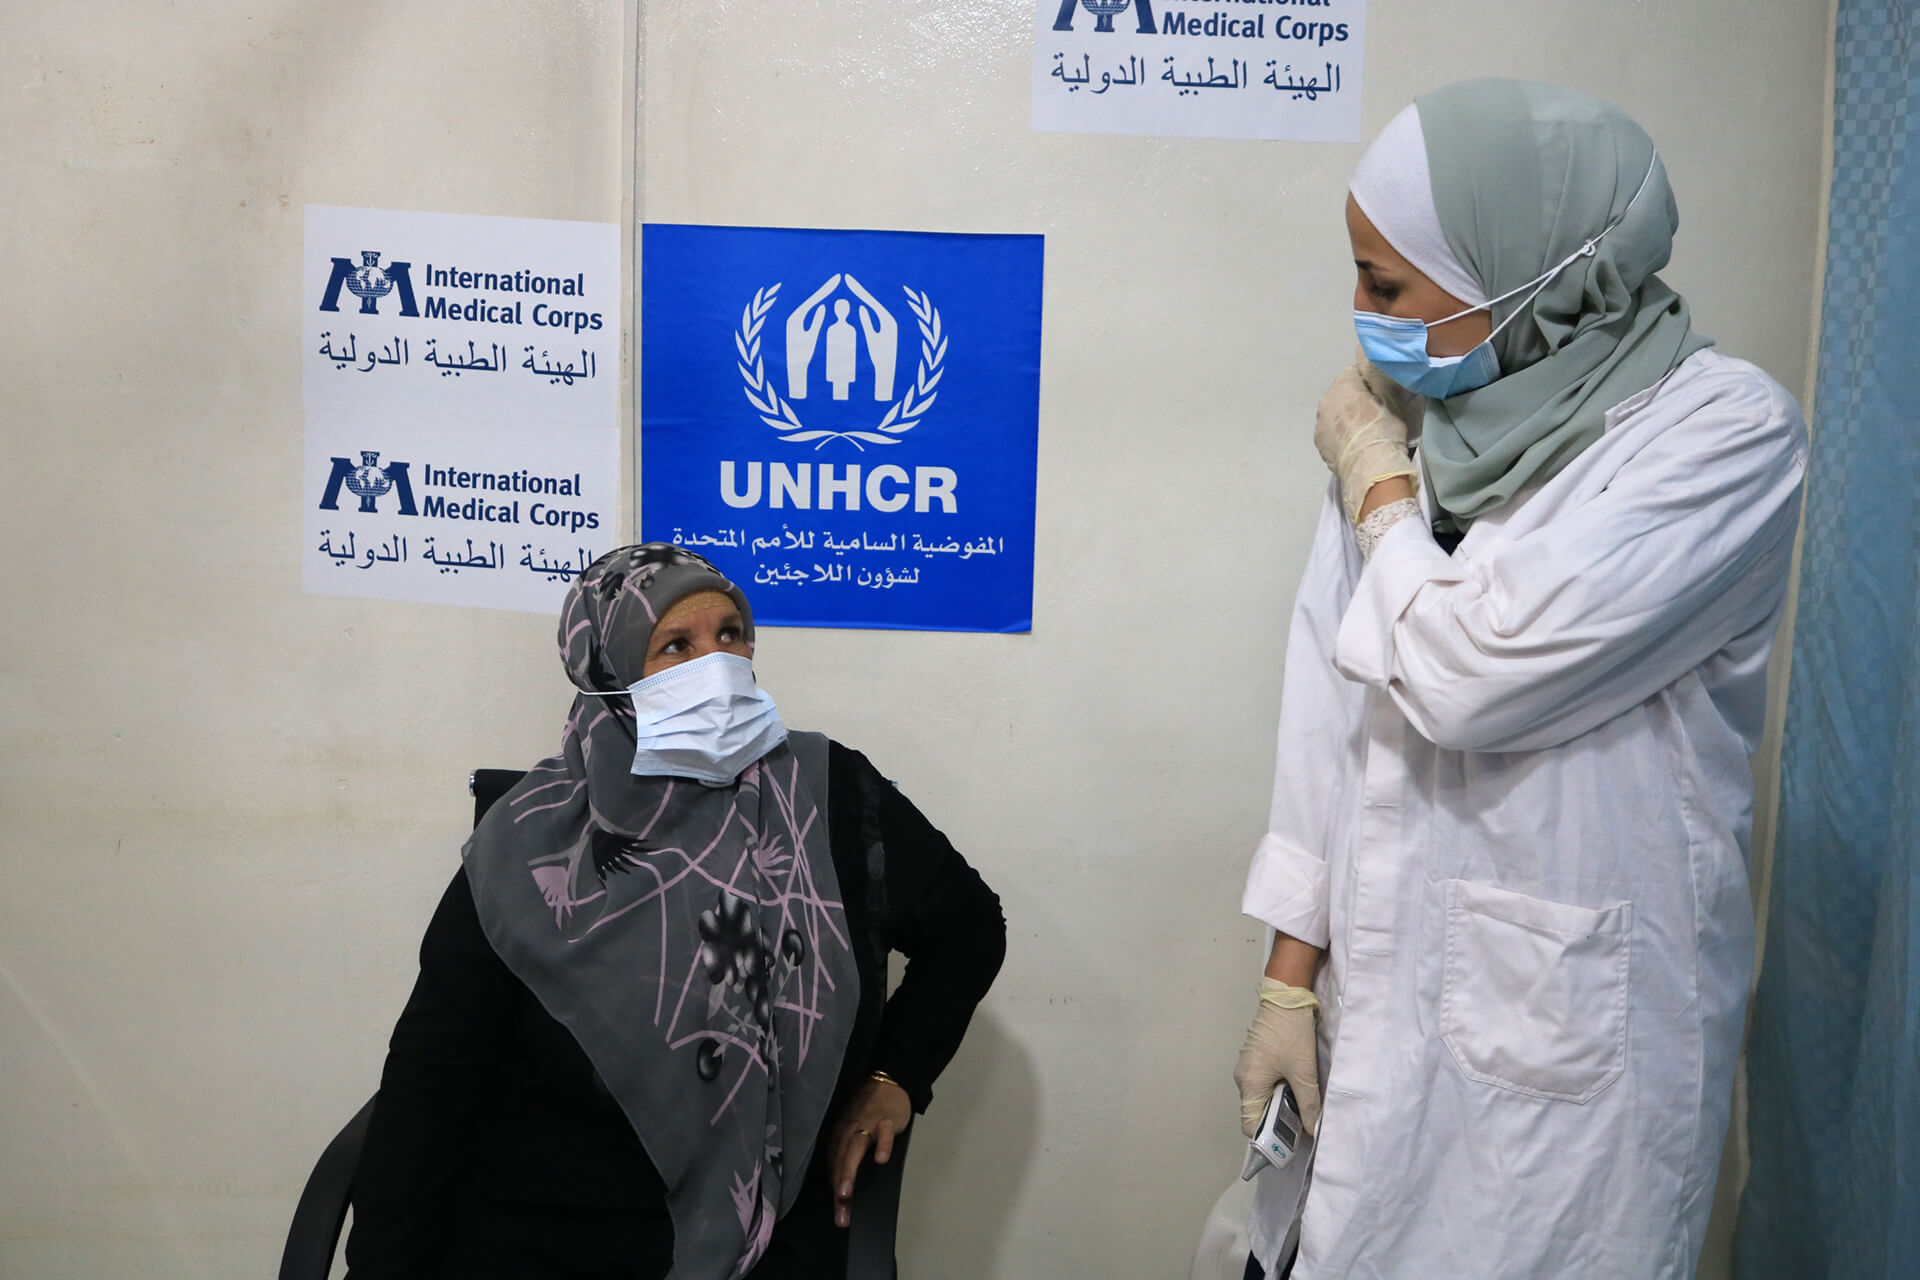 In Jordan, we’re helping residents of Azraq and Zaatari refugee camps get their COVID-19 vaccination.